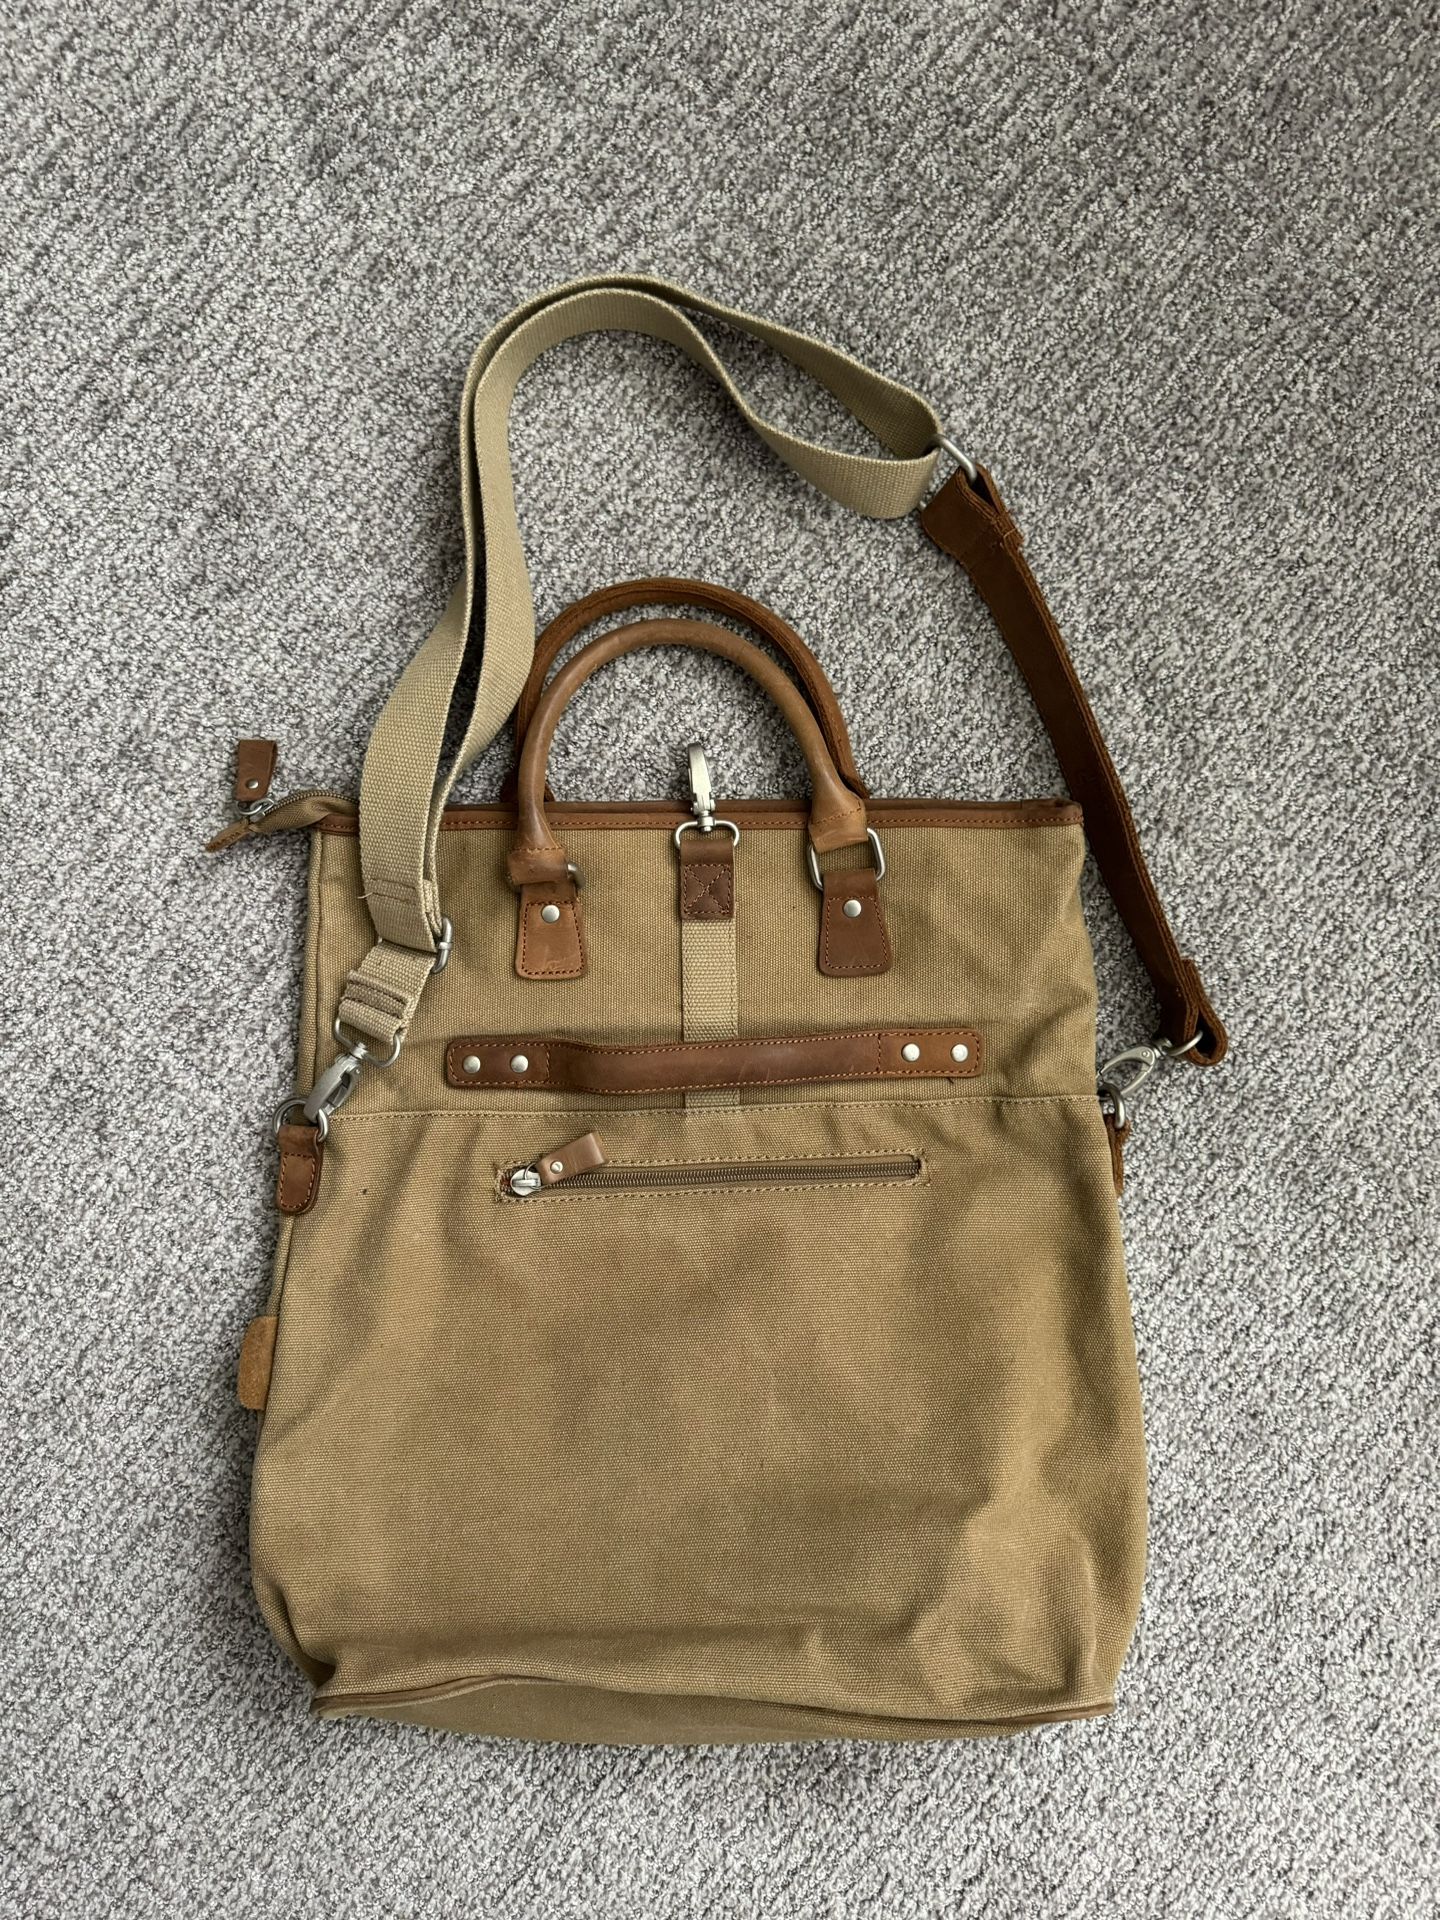 Purse/handled Heavy Canvas Tote